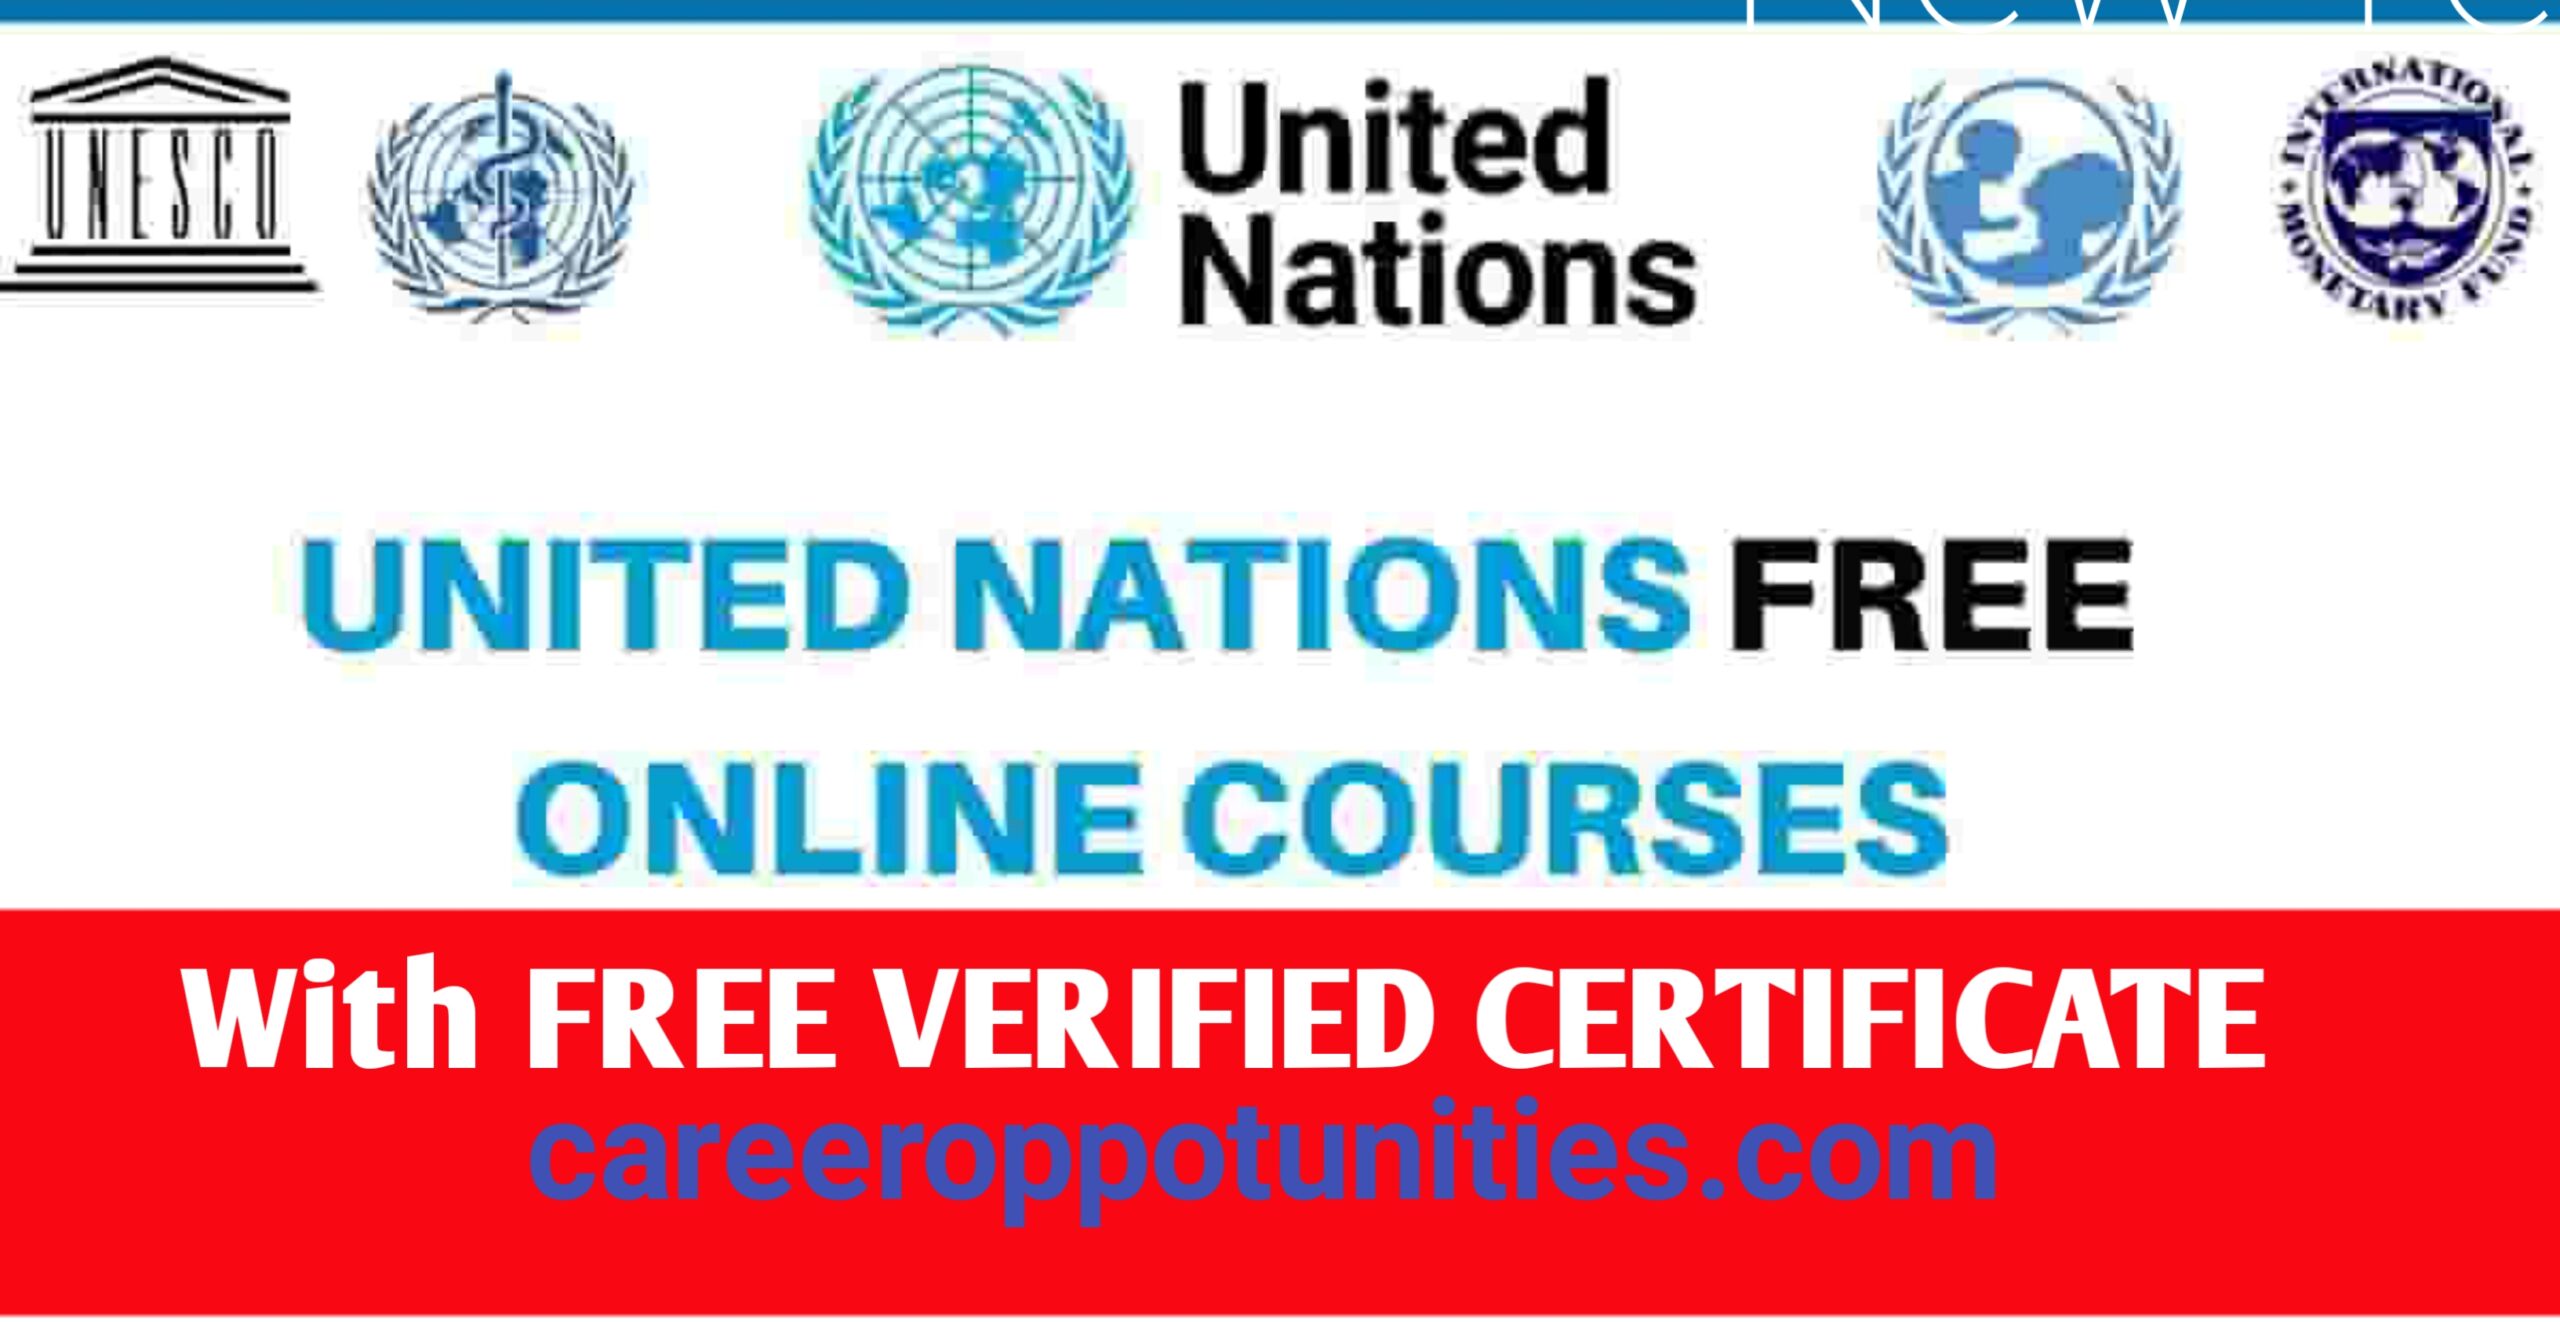 20220415 163756 scaled 1 - United Nations Free Online Courses with free Certificates